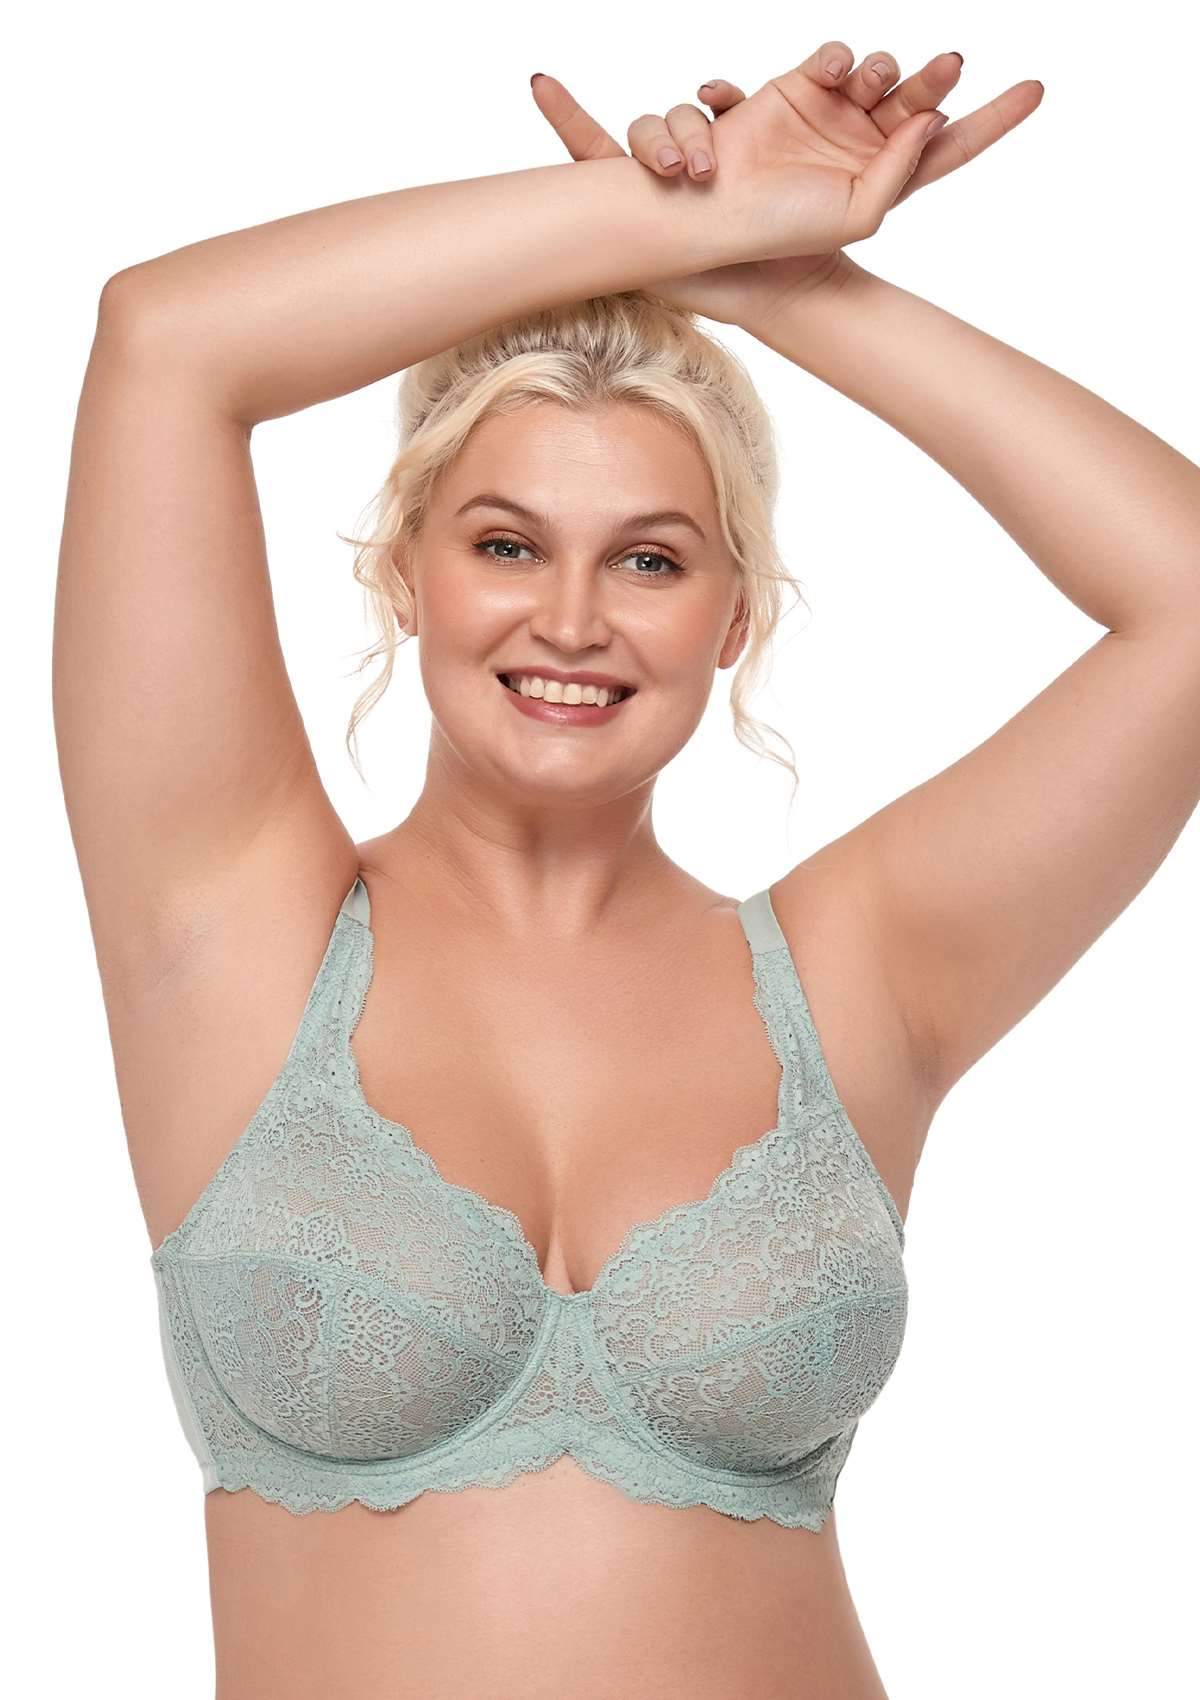 HSIA All-Over Floral Lace: Best Bra For Elderly With Sagging Breasts - Crystal Blue / 44 / C